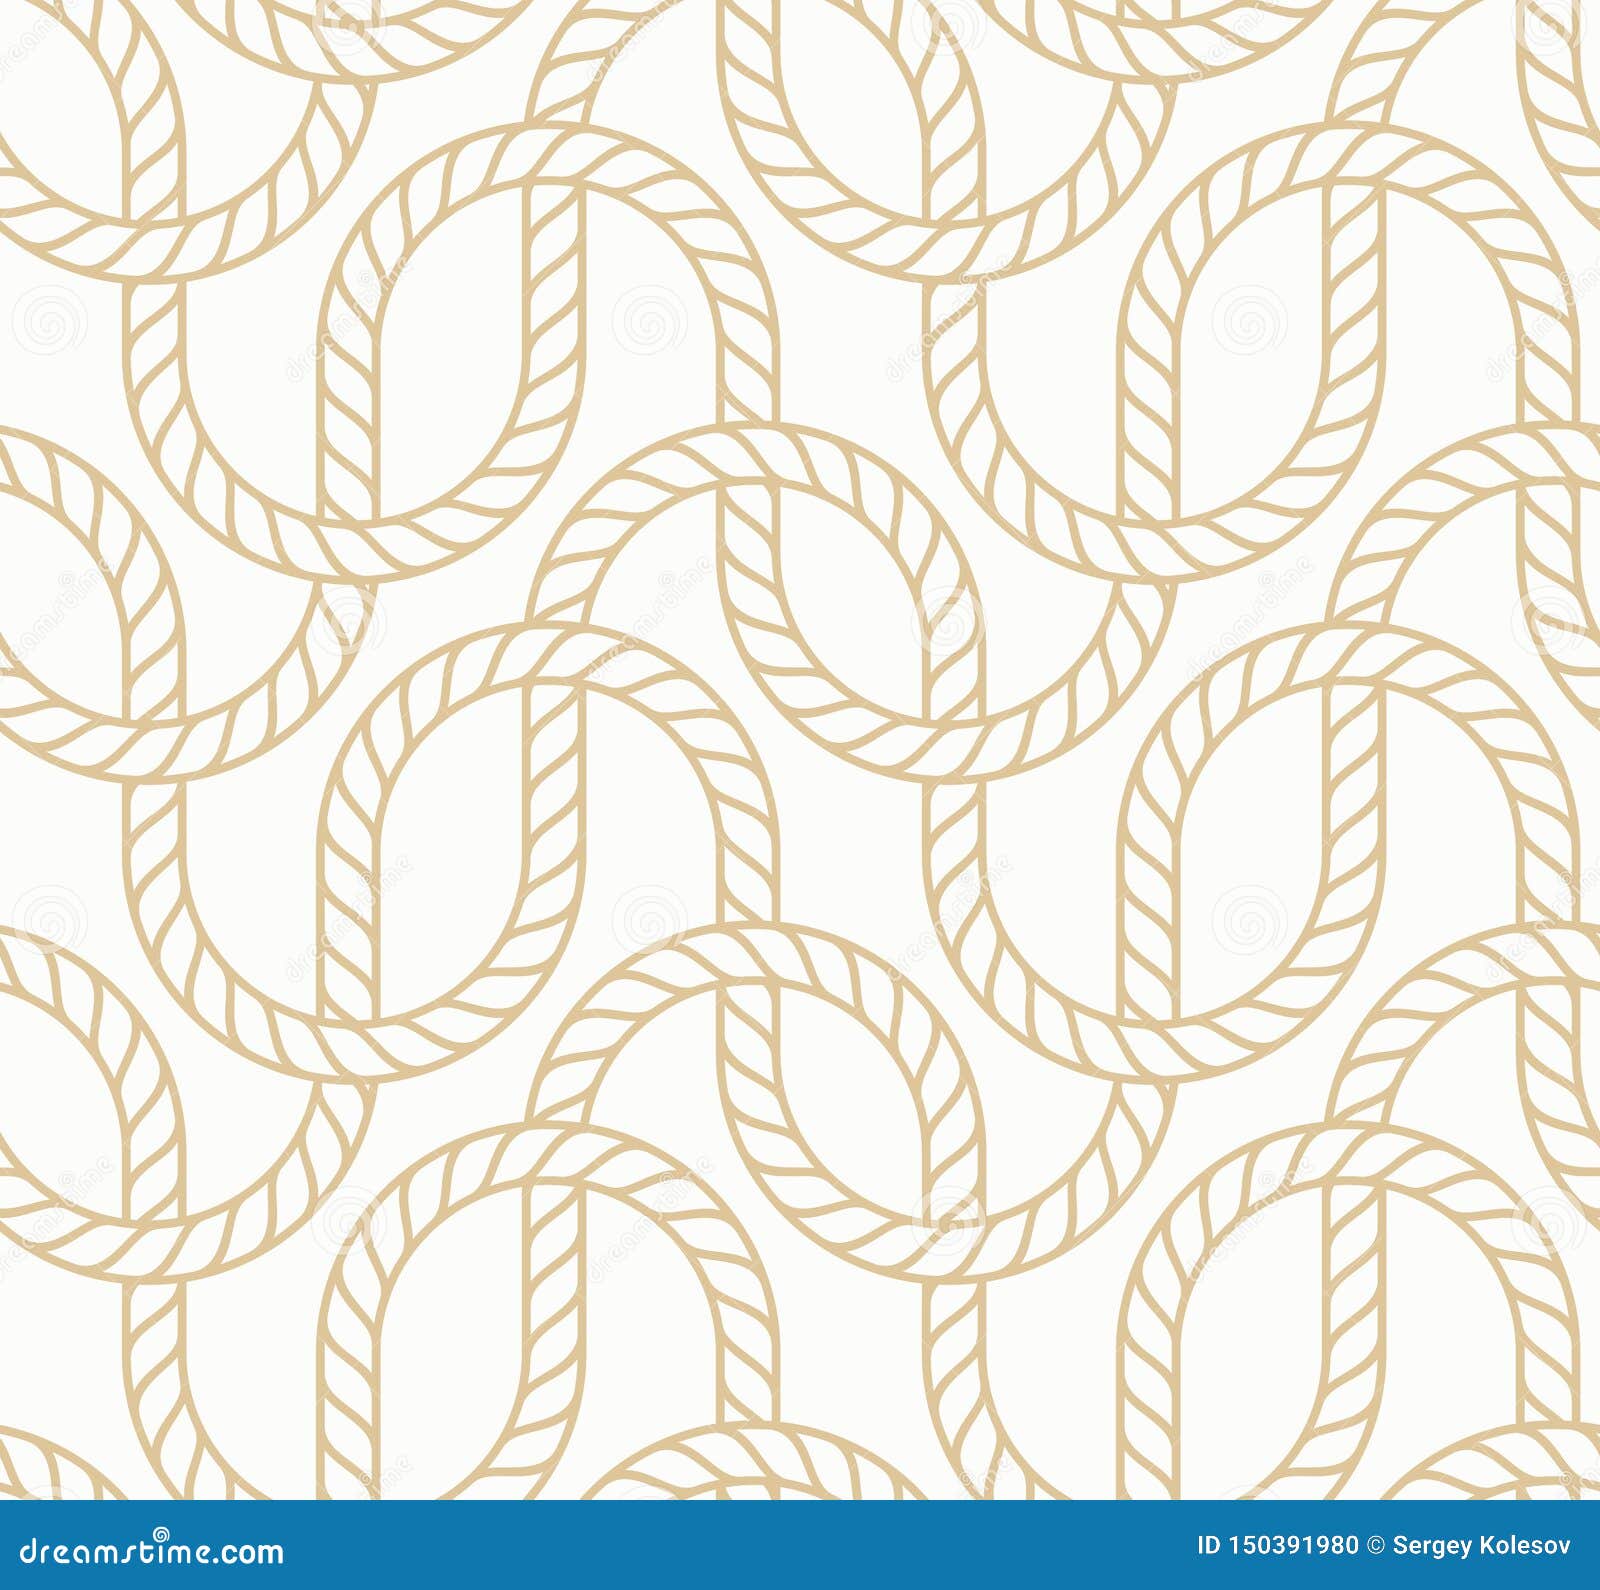  seamless background with marine rope. nautic pattern white and gold